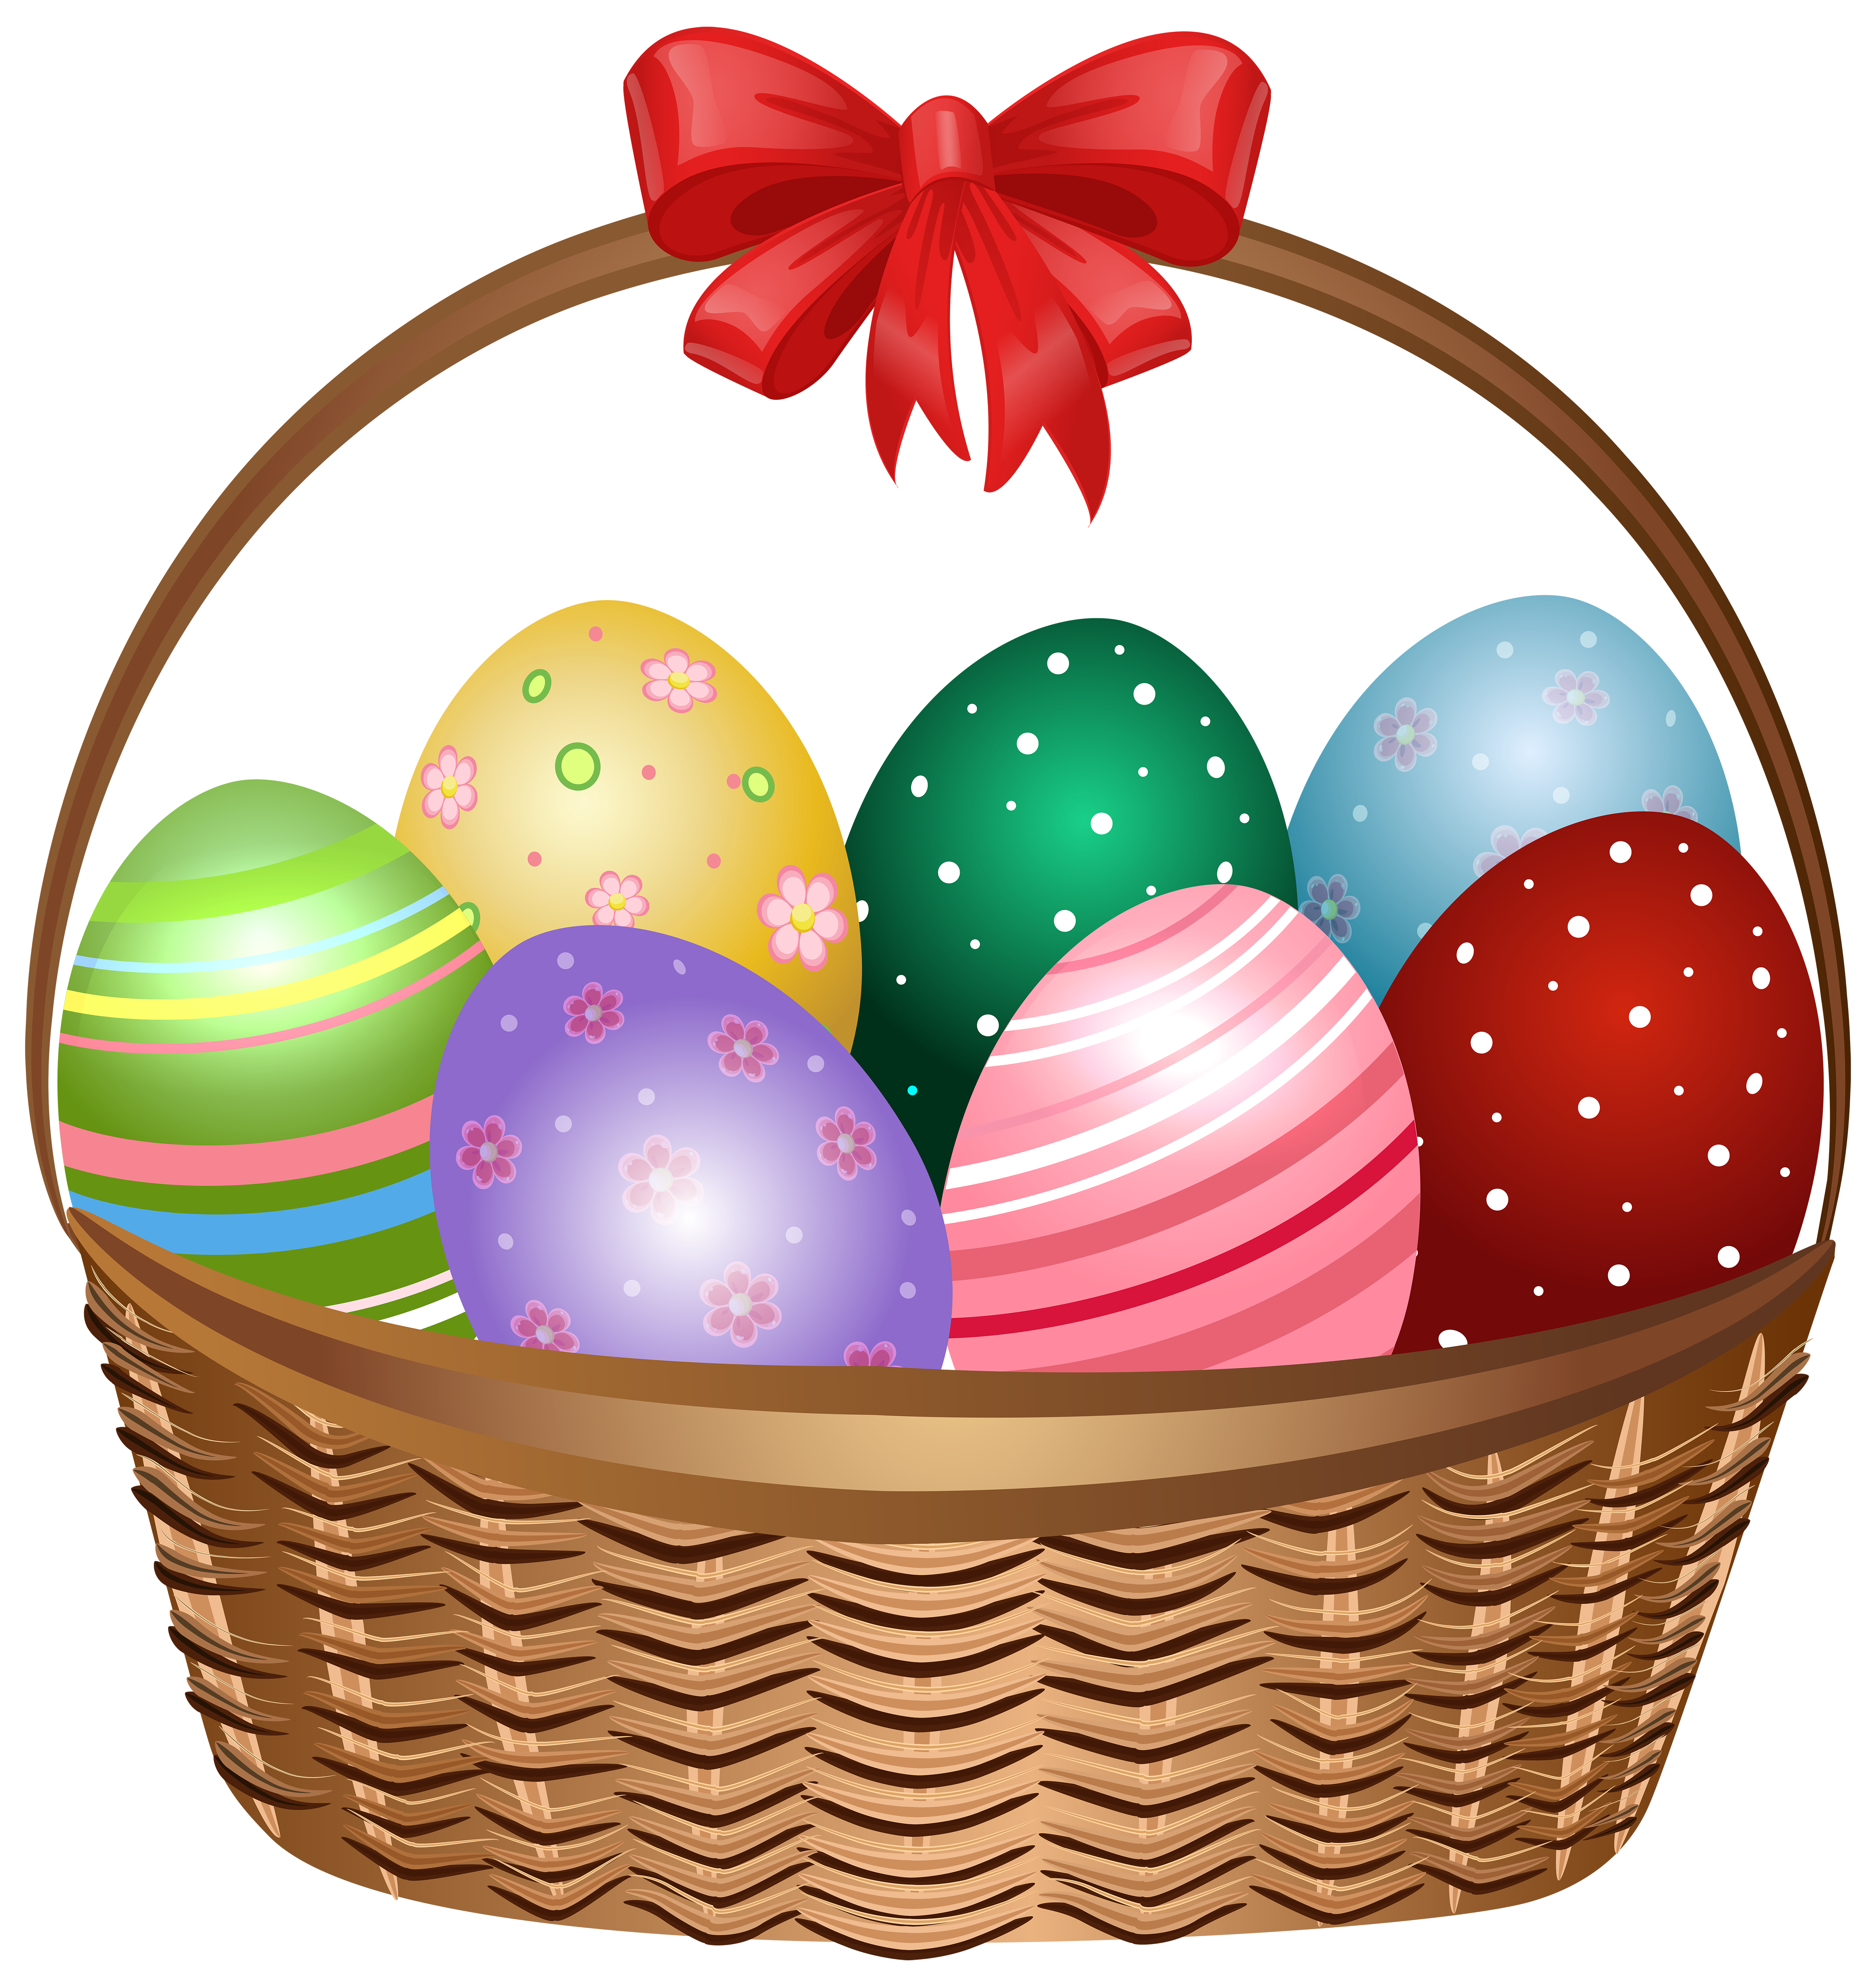 clip art for easter baskets - photo #17